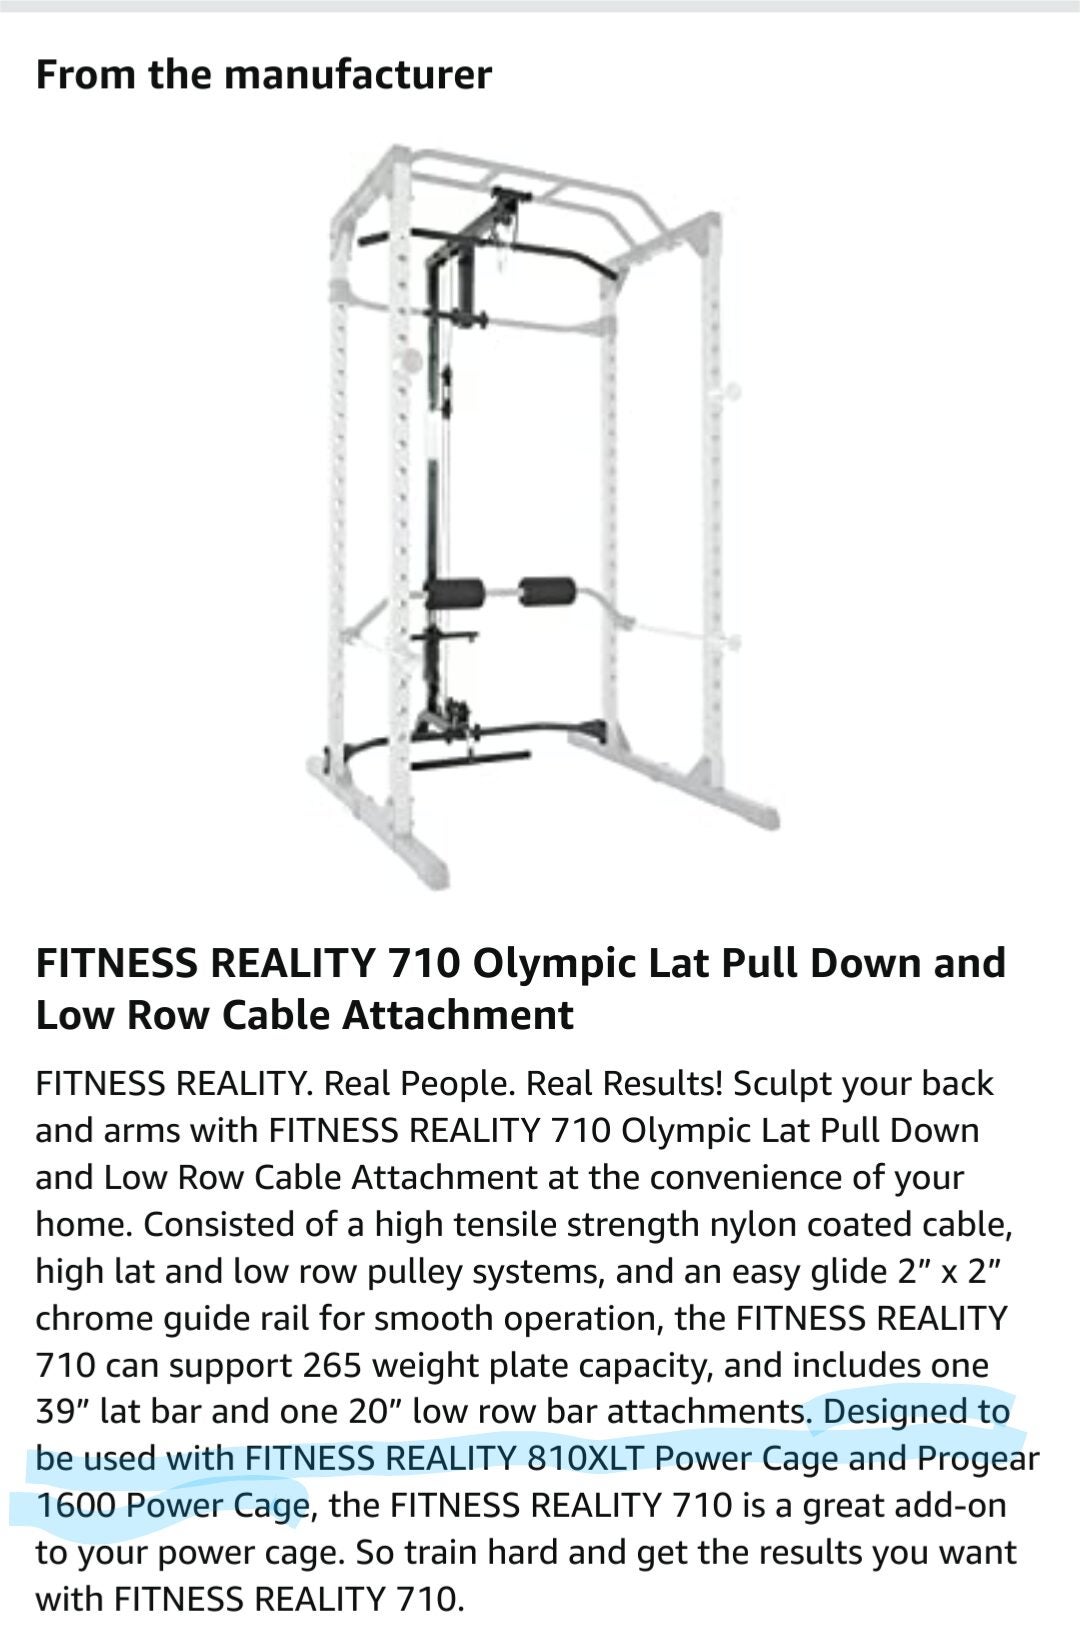 1 Year Later: Fitness Reality 810xlt Budget Squat Rack w/ Lat